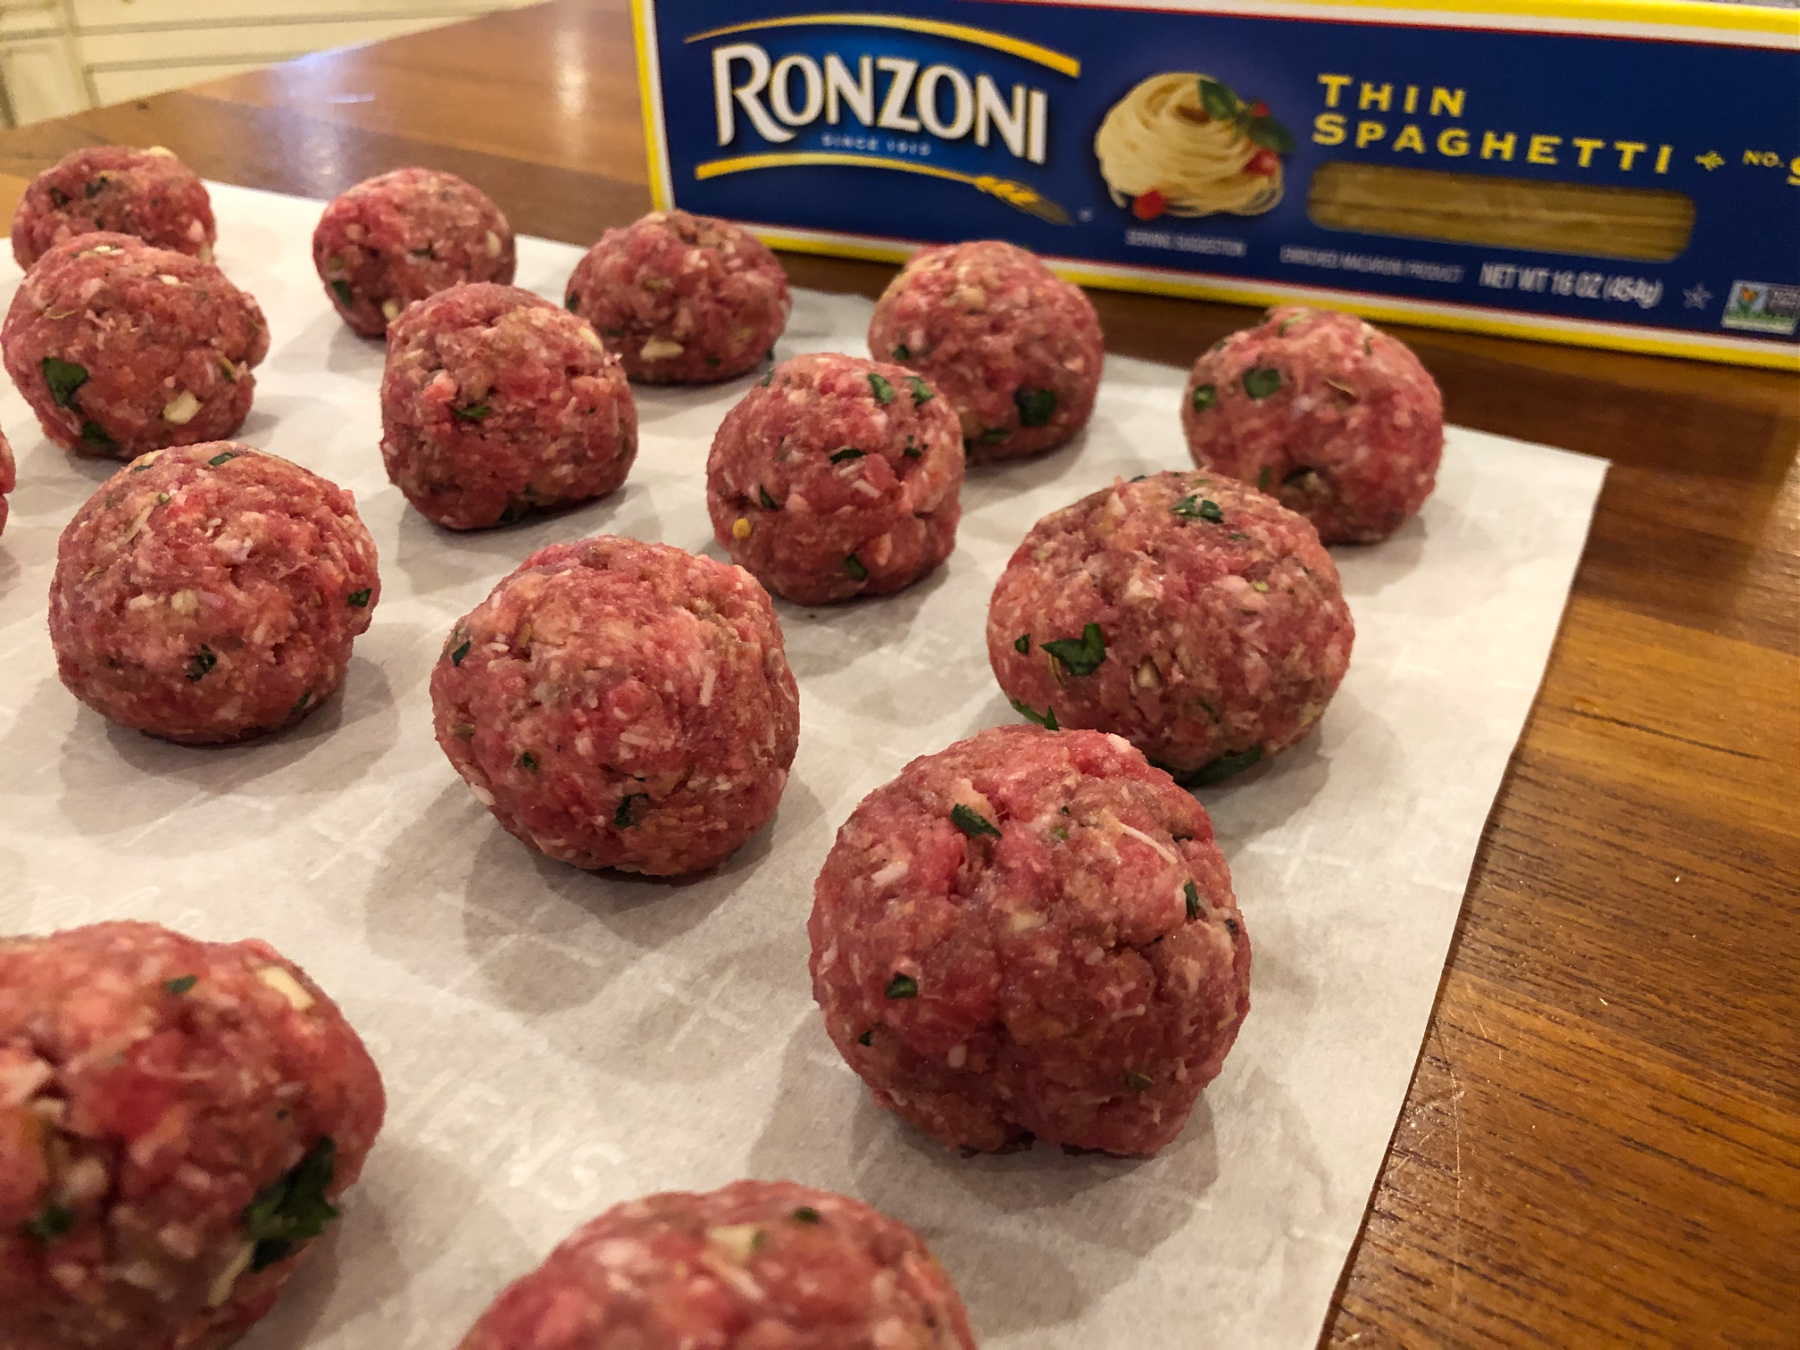 One-Pot Thin Spaghetti And Meatballs - Amazing Recipe To Go With The Ronzoni BOGO Sale! on I Heart Publix 3